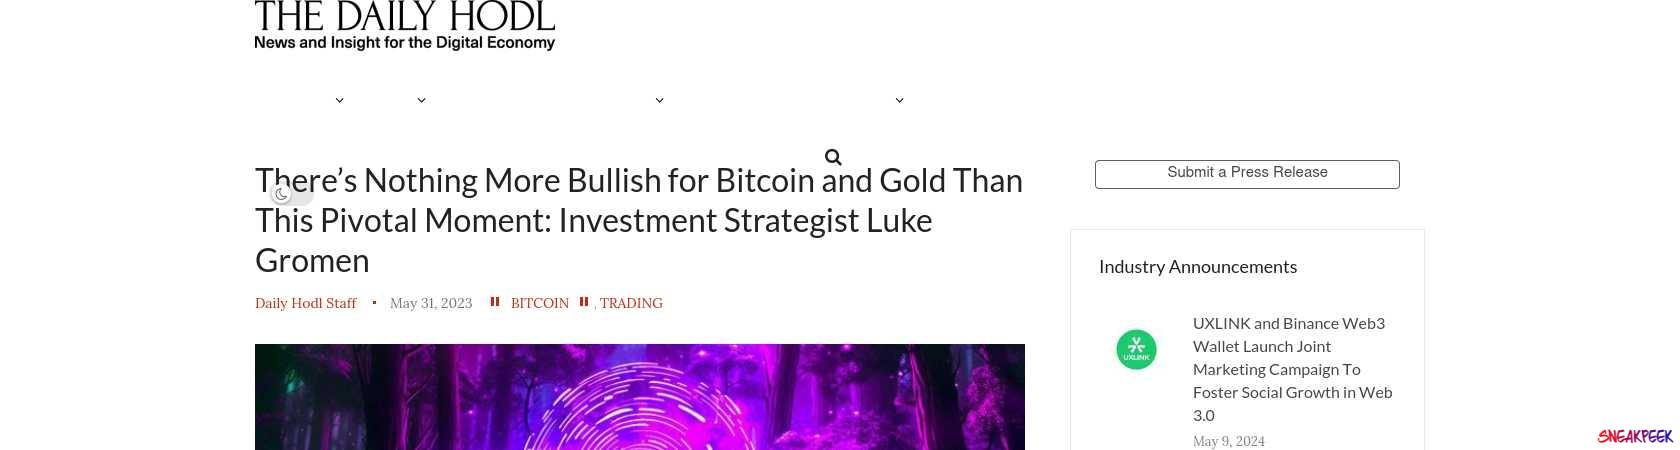 Read the full Article:  ⭲ There’s Nothing More Bullish for Bitcoin and Gold Than This Pivotal Moment: Investment Strategist Luke Gromen